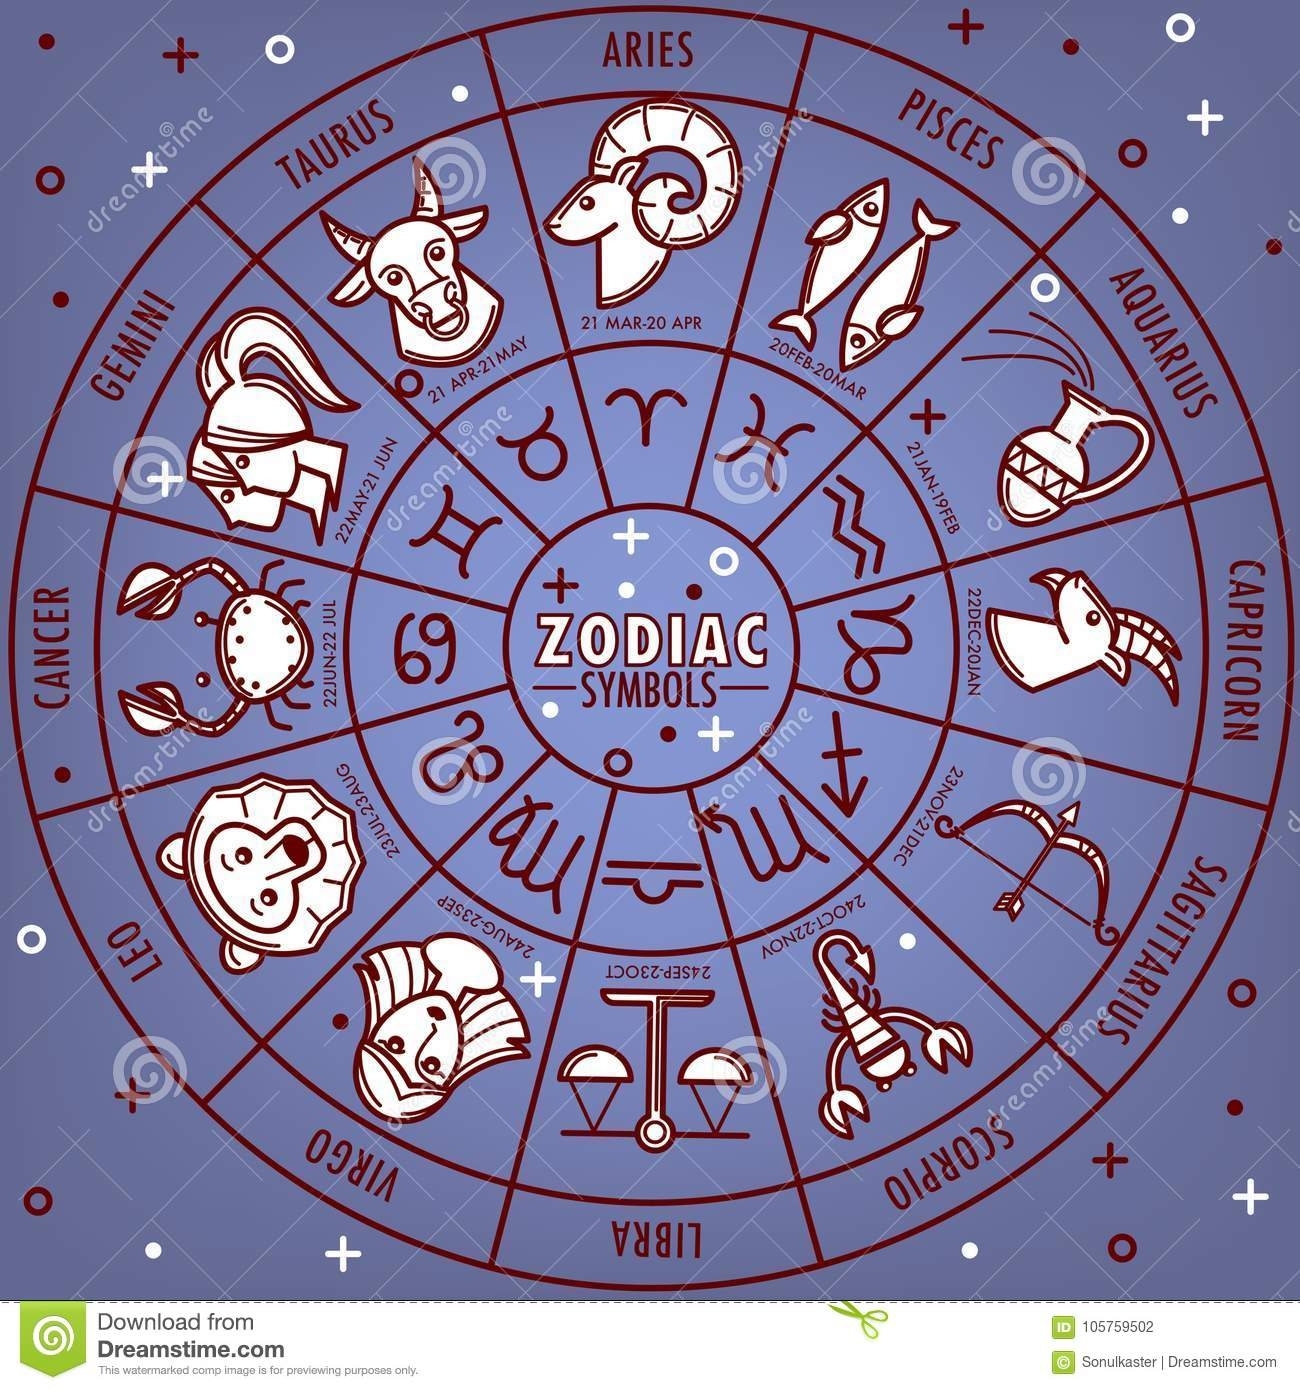 Zodiac Horoscope Signs With Dates Vector Icons On Star Map The Zodiac Calendar Dates